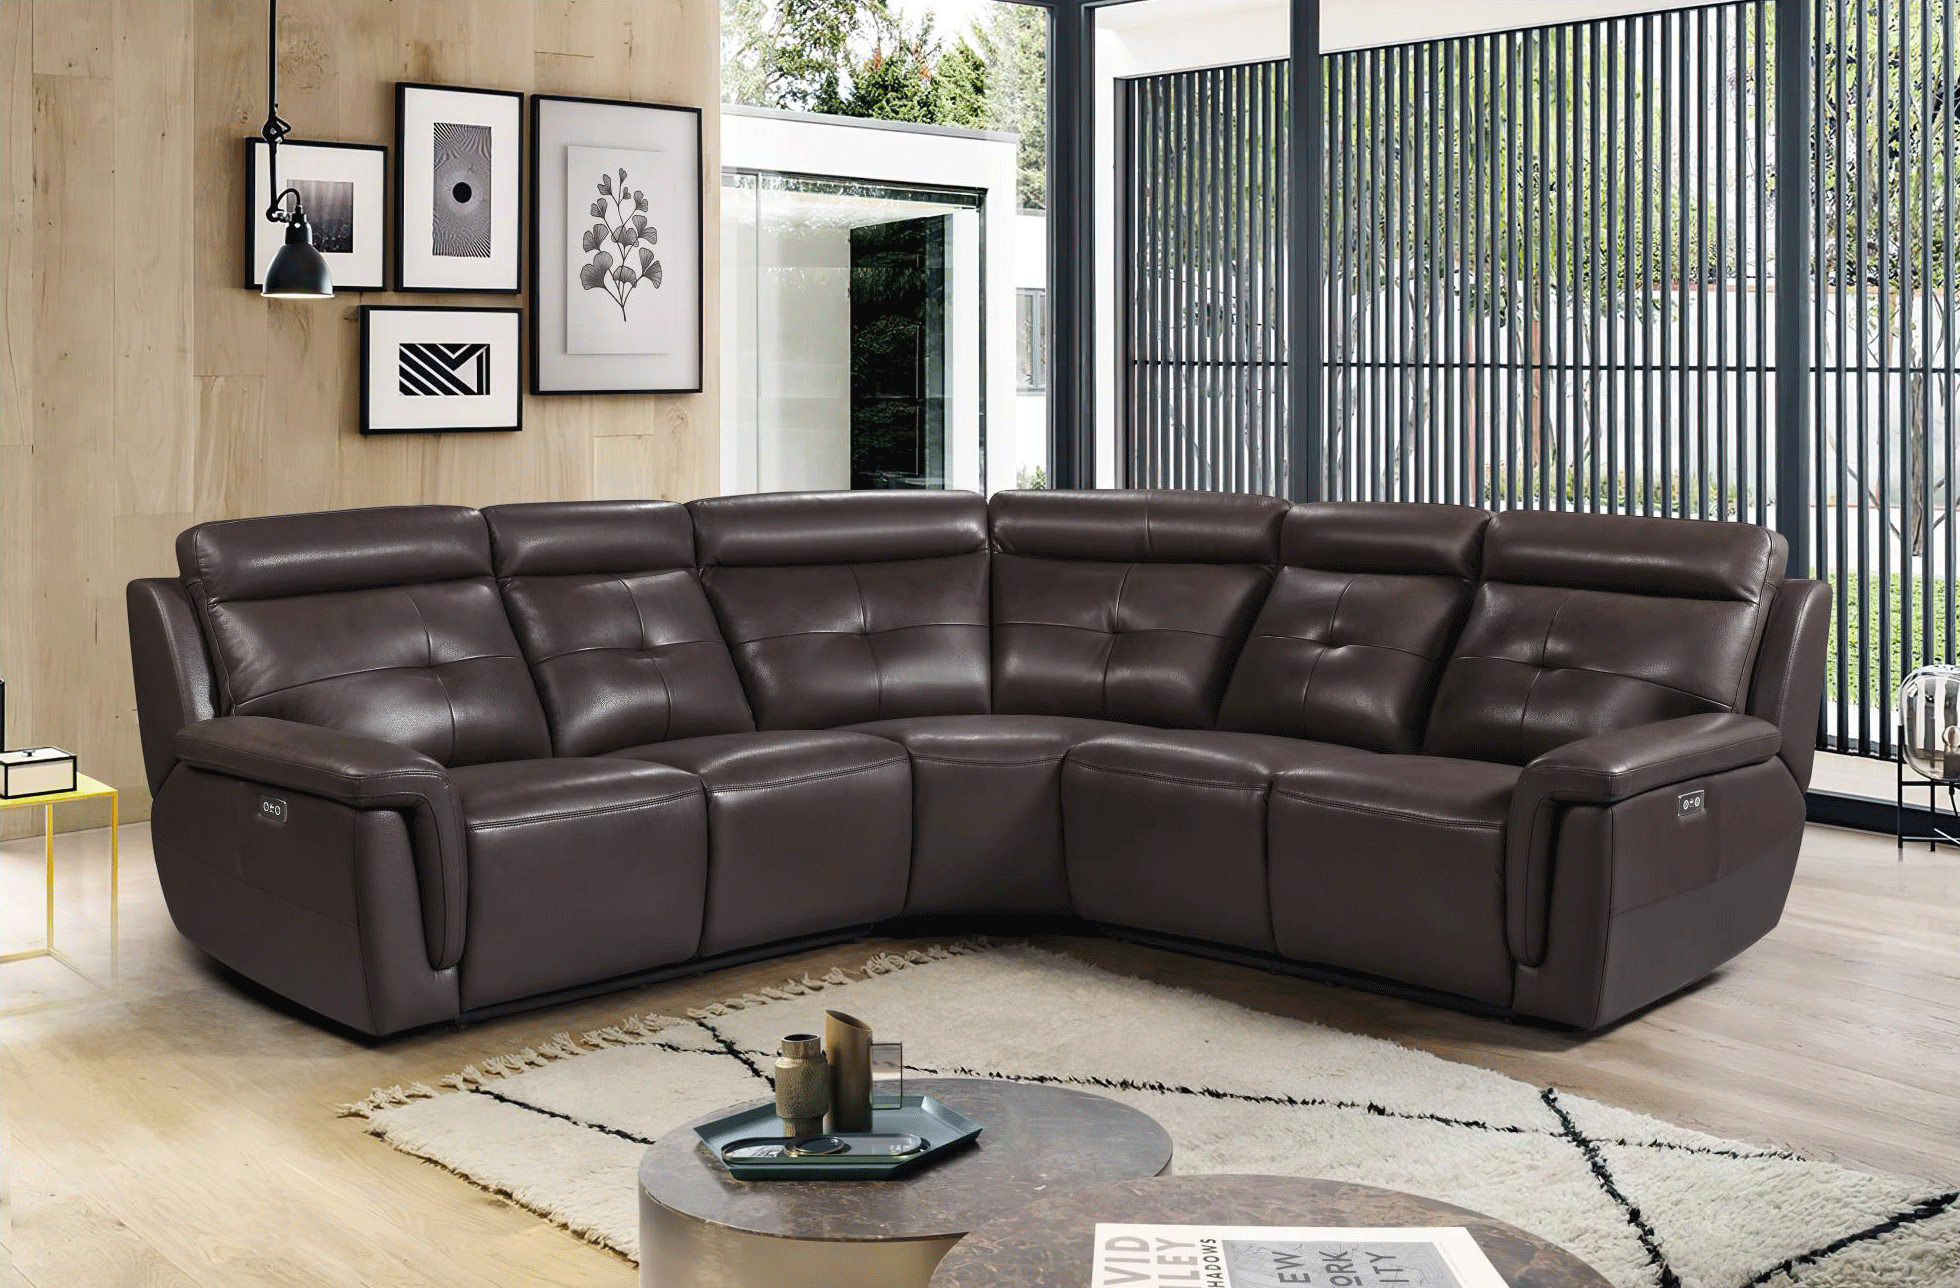 Brands Kuka Home 2937 Sectional w/ electric recliners